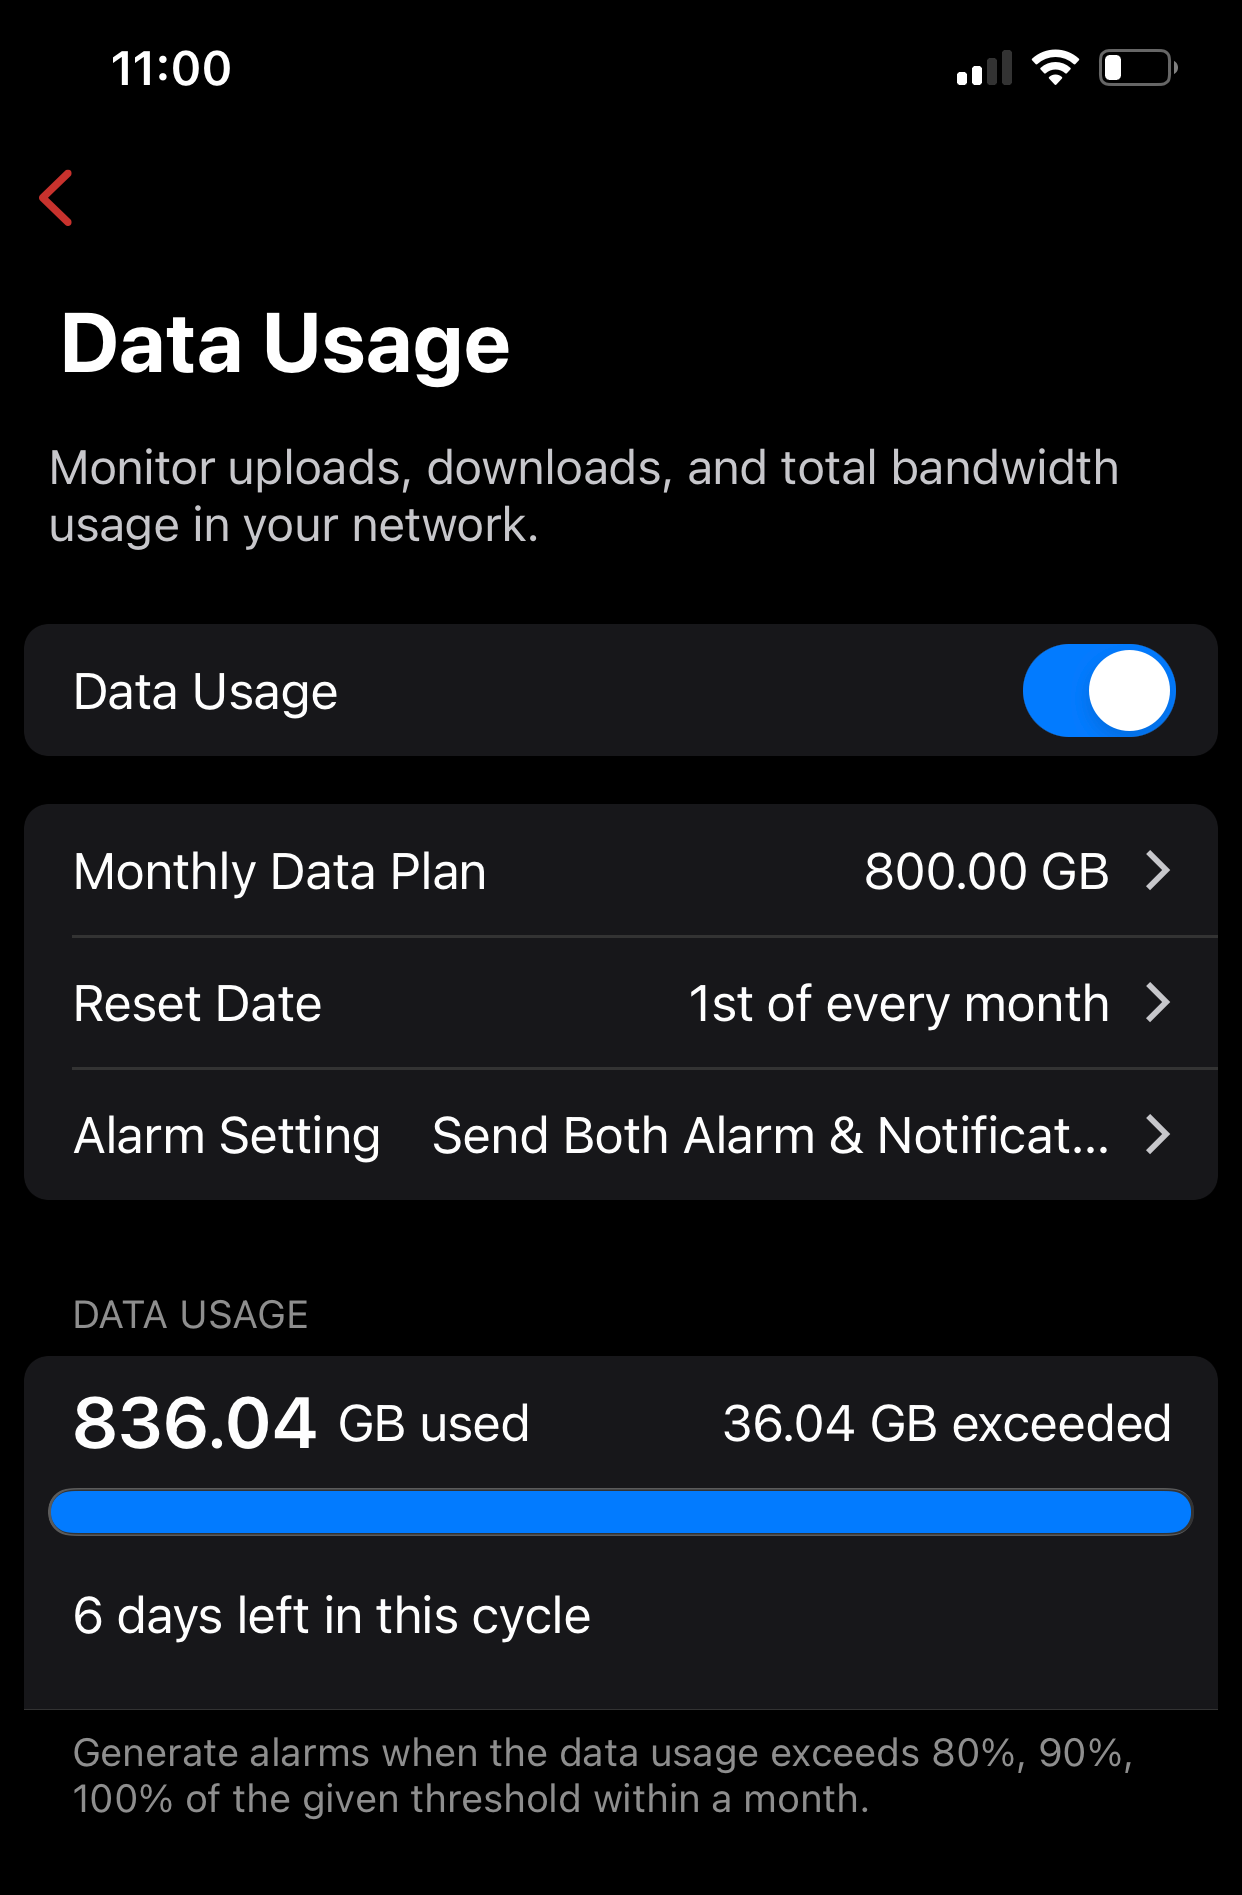 Example Internet Usage with deep insights into plan, reset data, and alarm settings